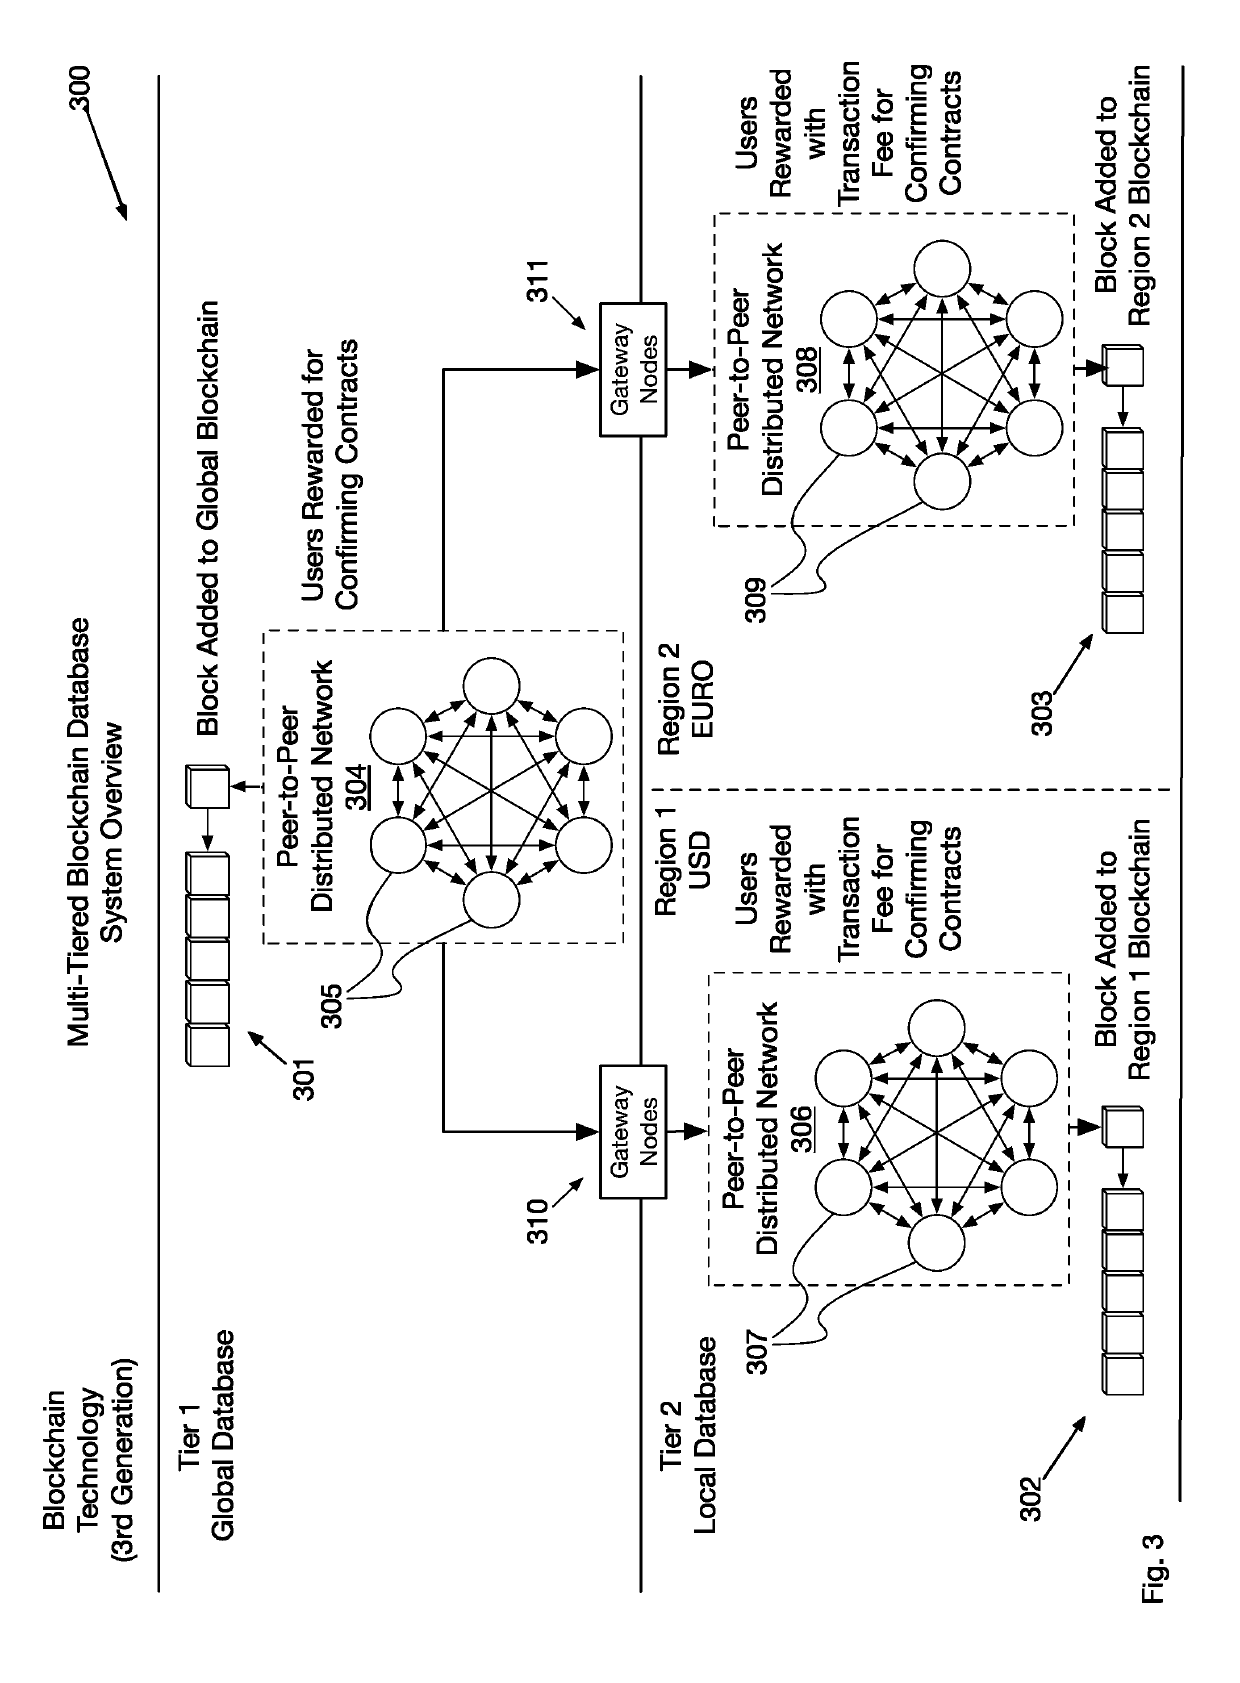 System and method for performance testing of scalable distributed network transactional databases